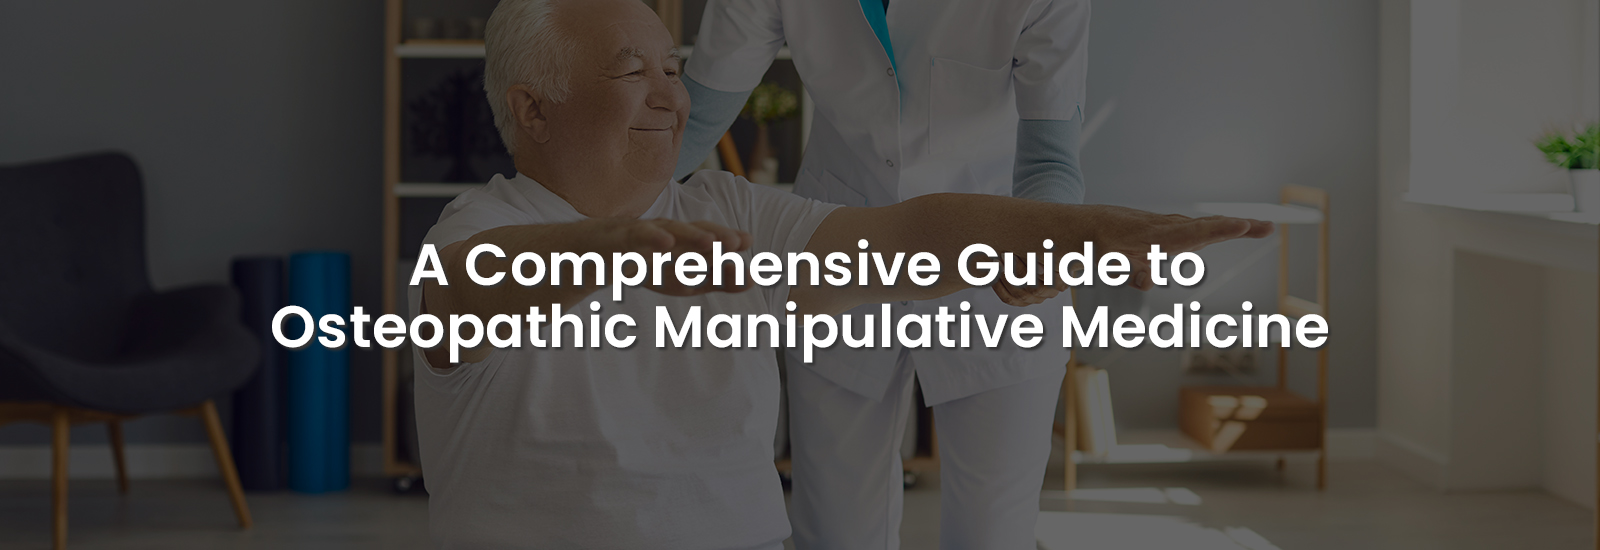 A Comprehensive Guide to Osteopathic Manipulative Medicine | Banner Image